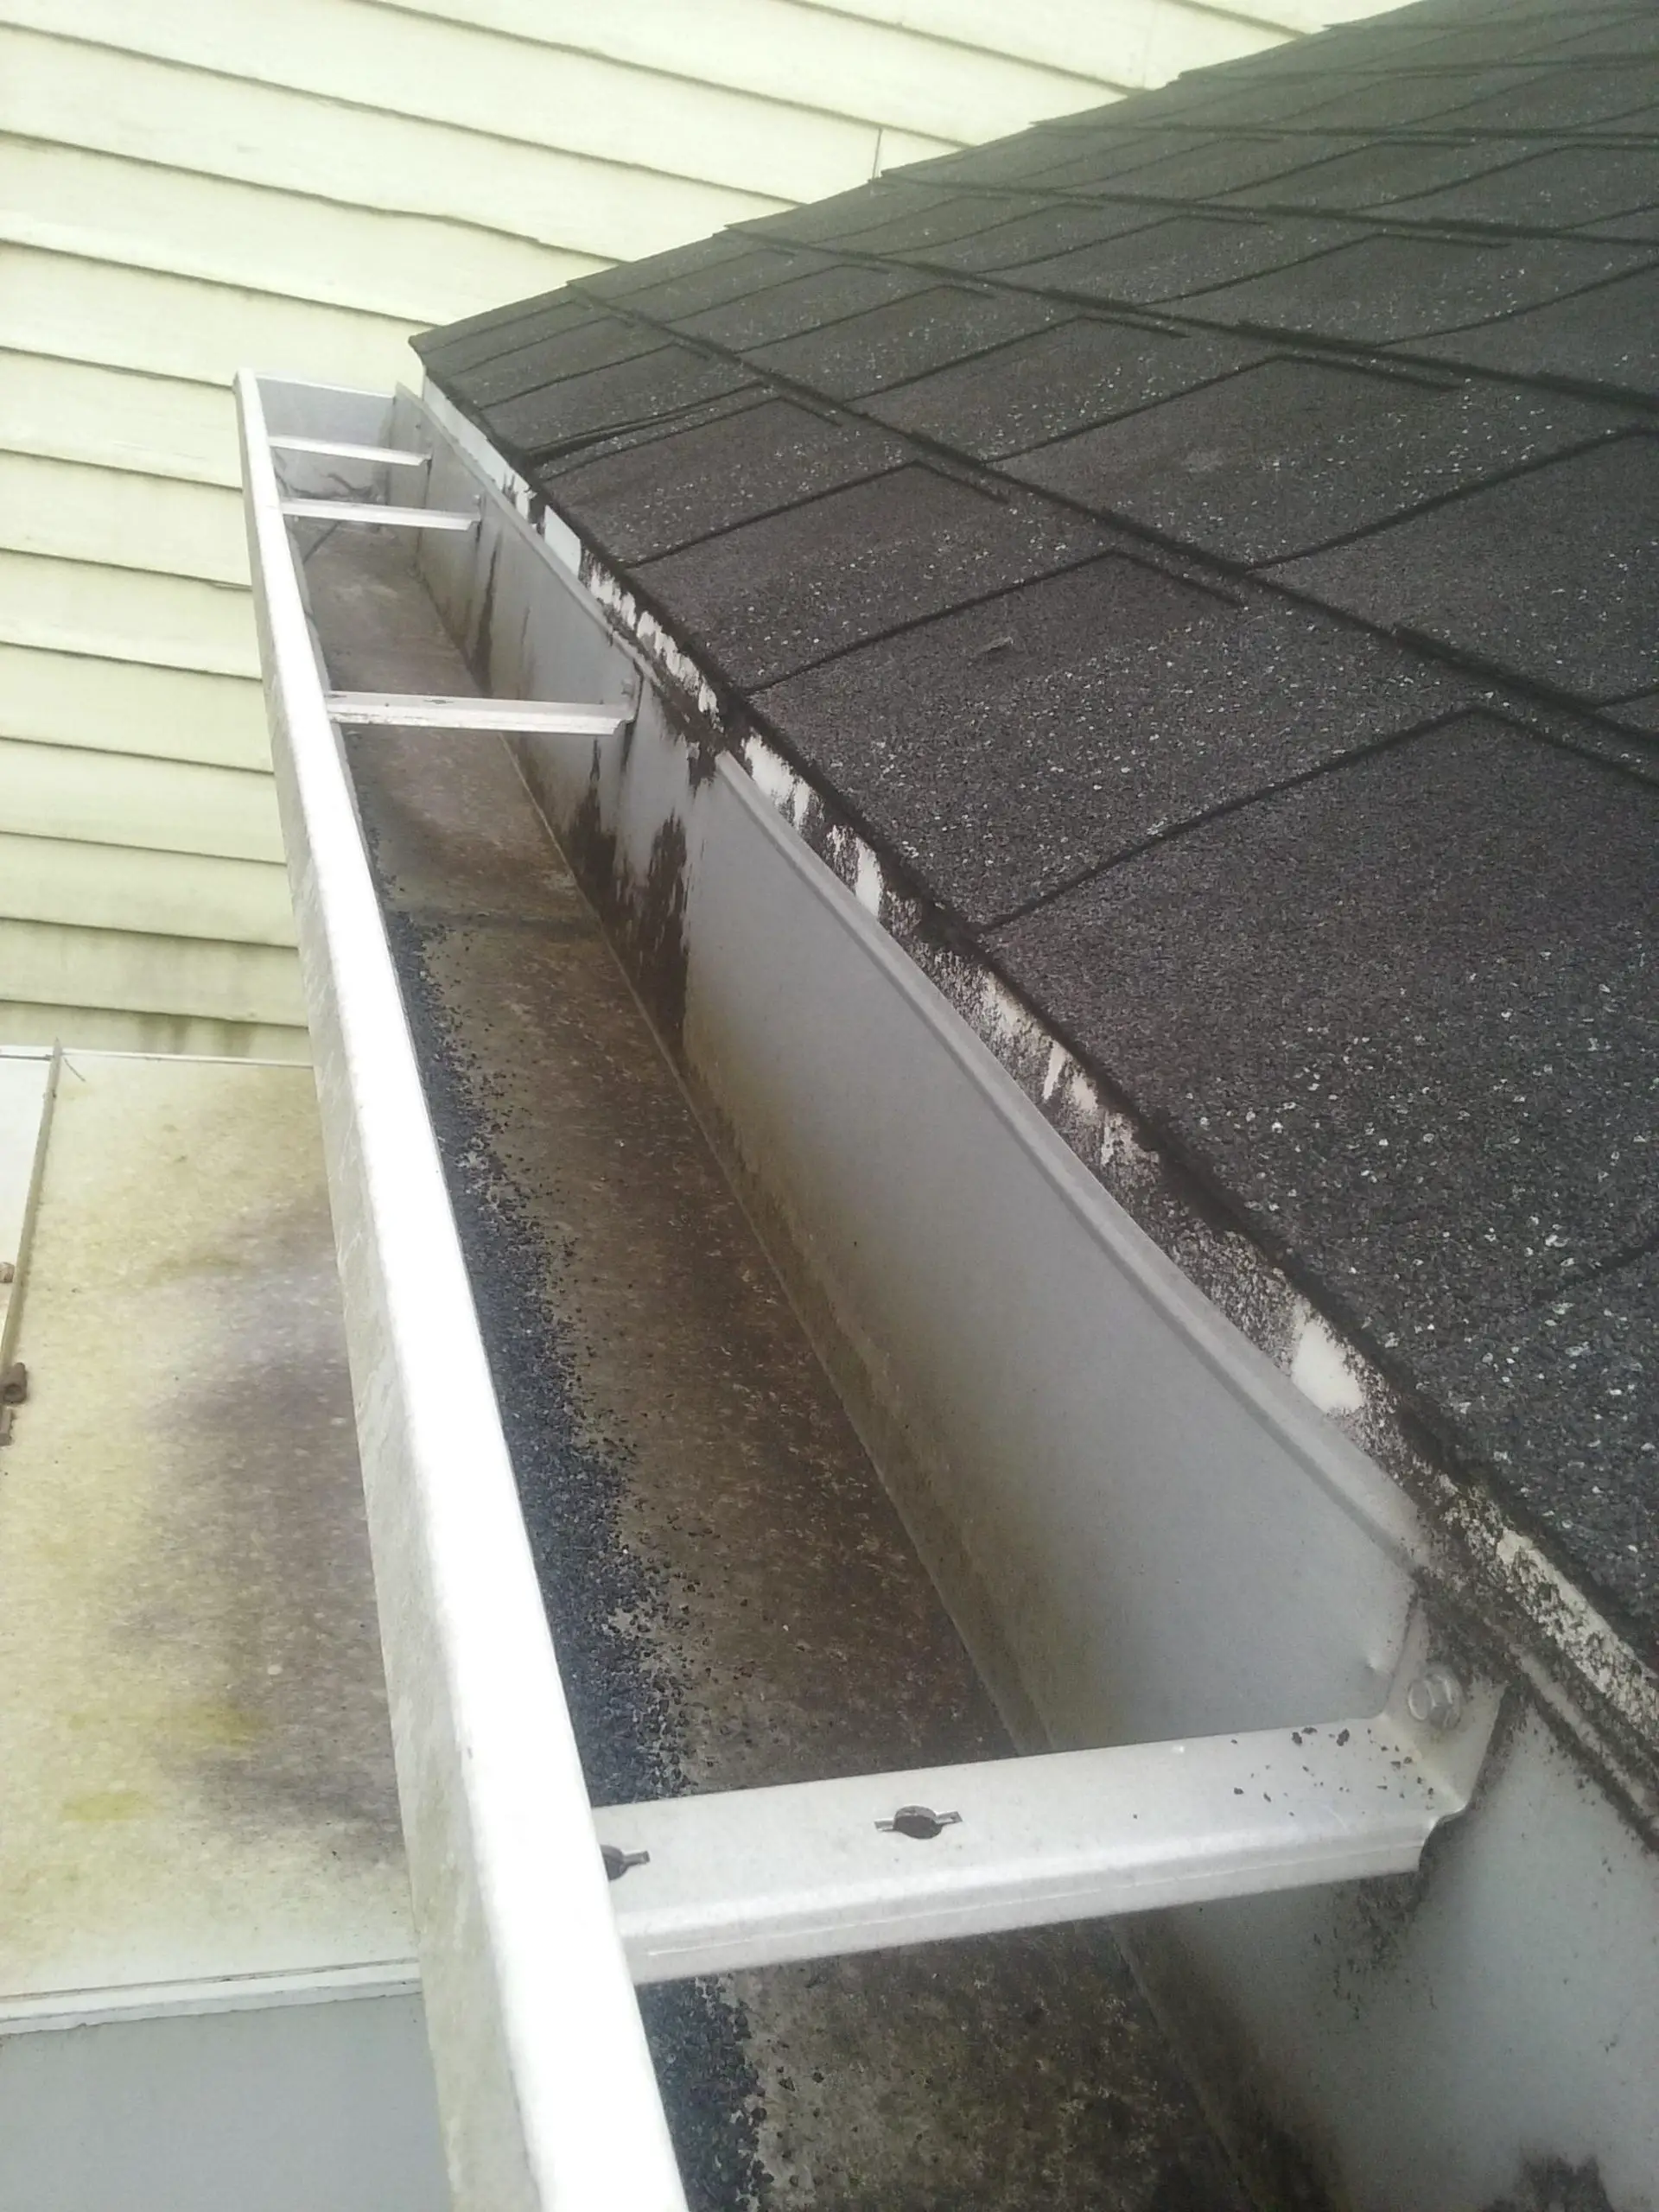 My roof should have a drip edge or overhanging shingles ...